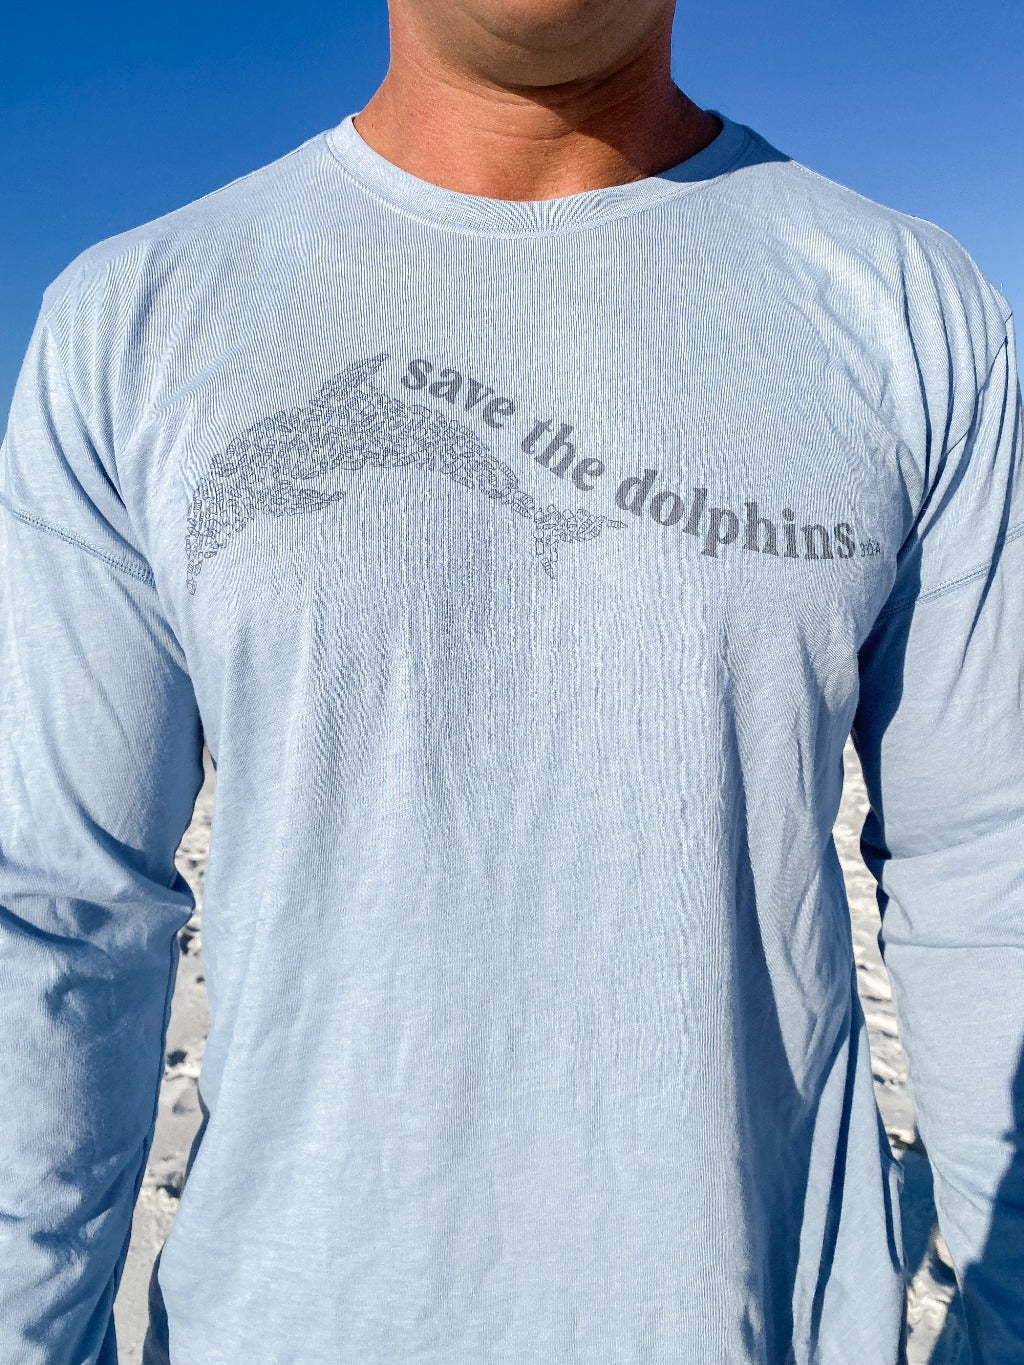 save the dolphins mens tee